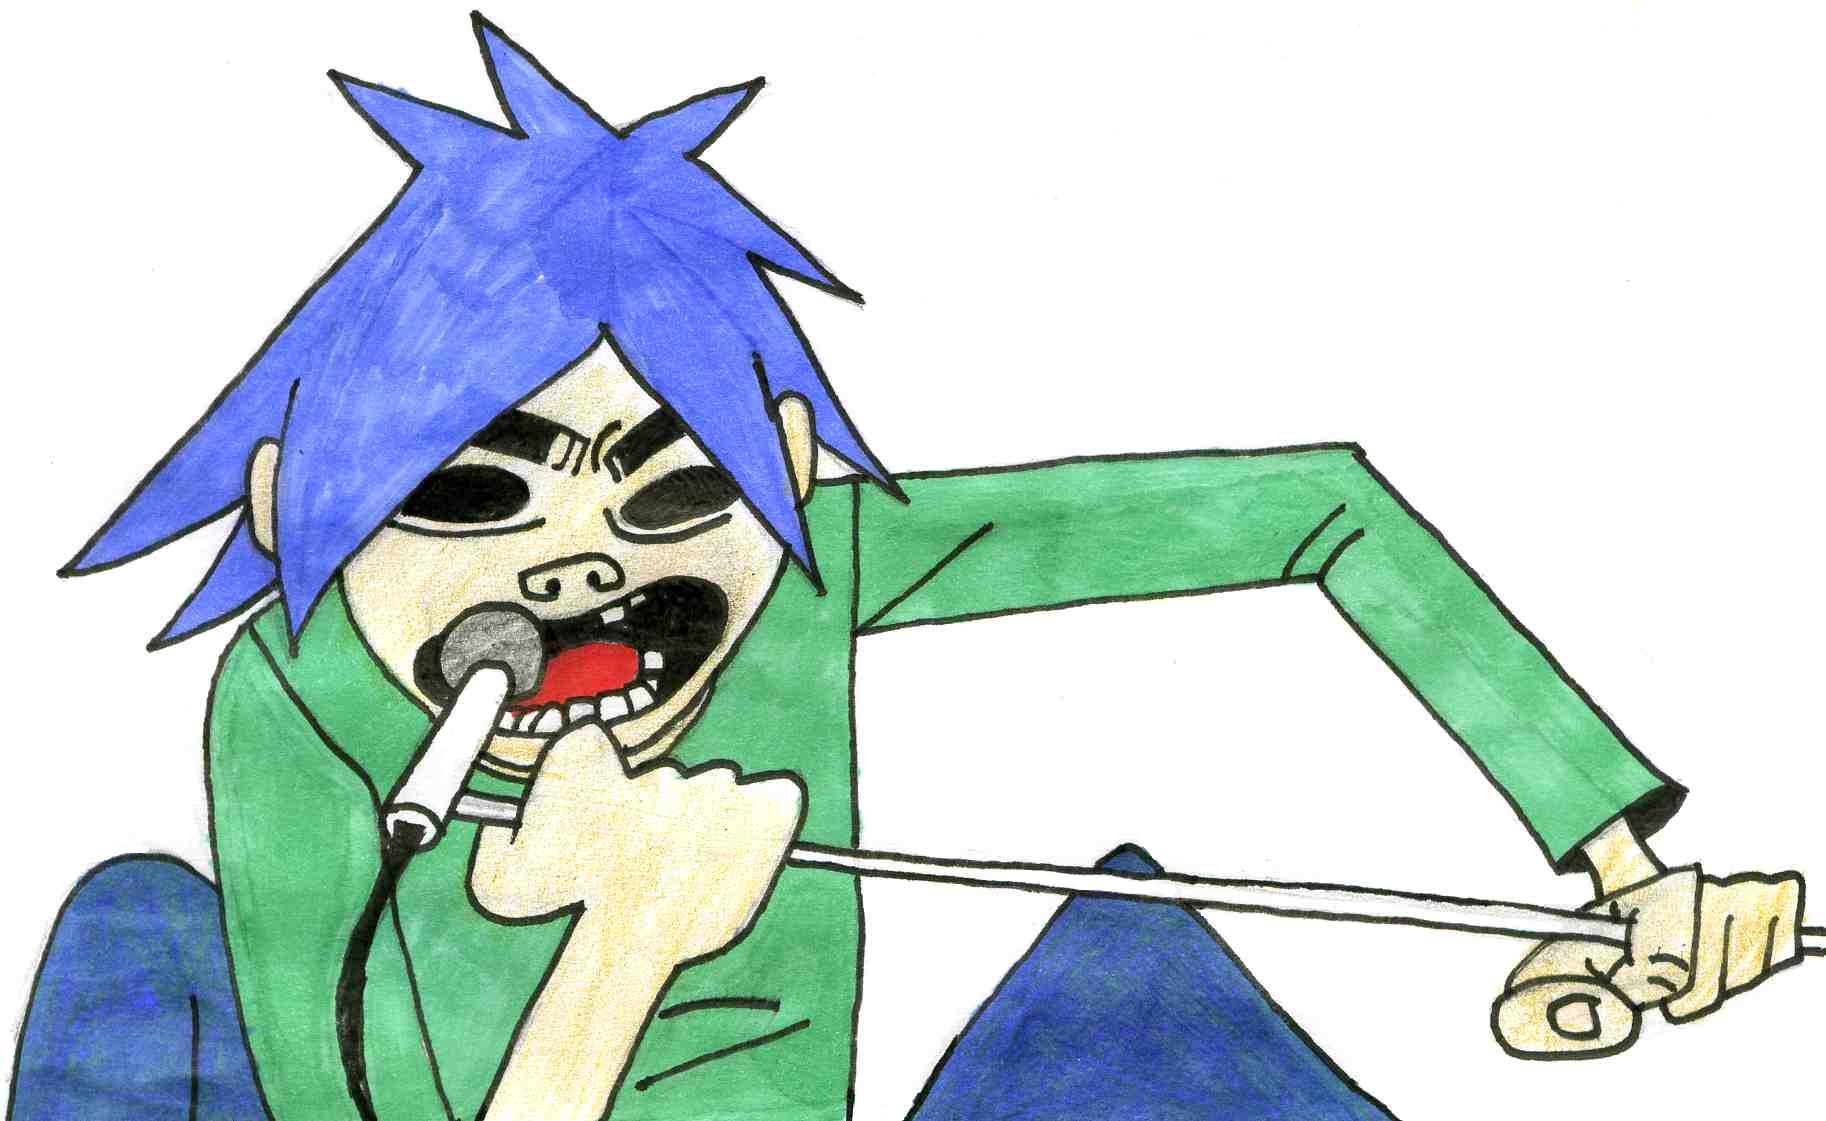 2-D by PimpShadow